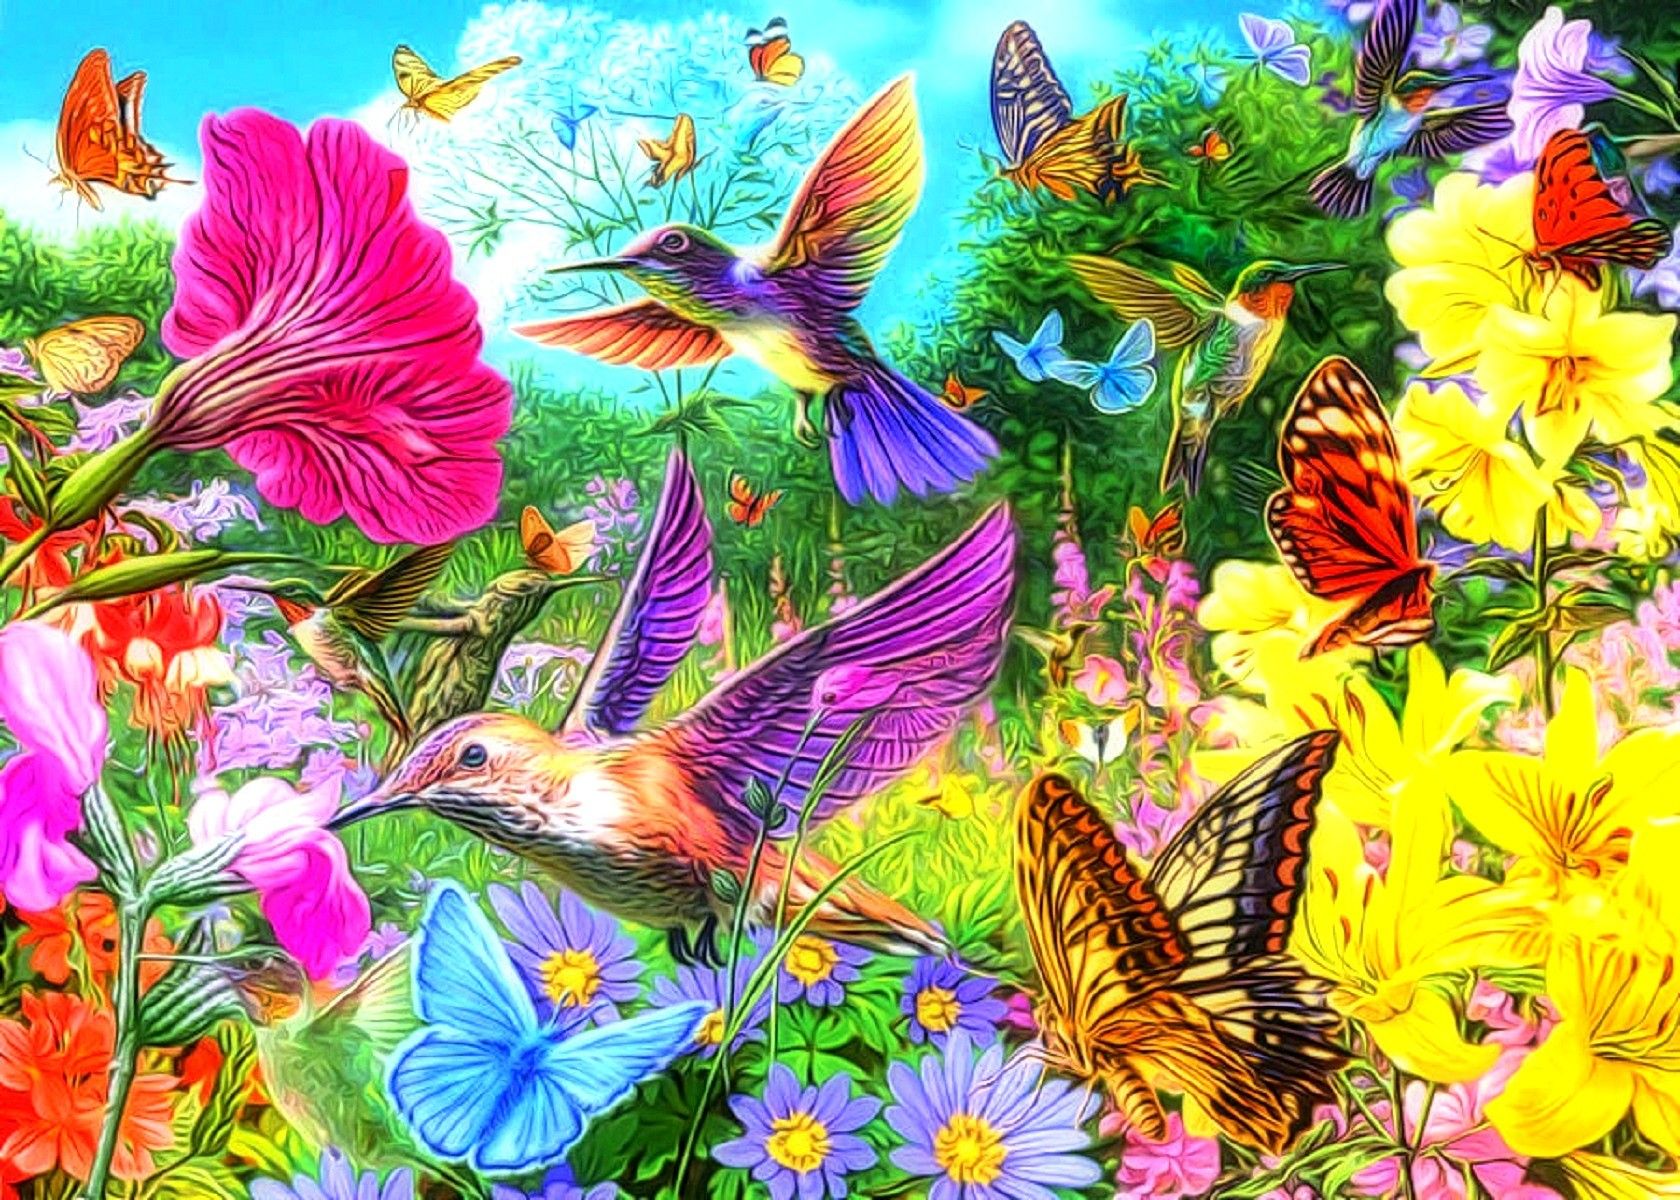 Colorful image of Spring free download for desktopsto5animations.com Wallpaper, Gifs, Background, Image